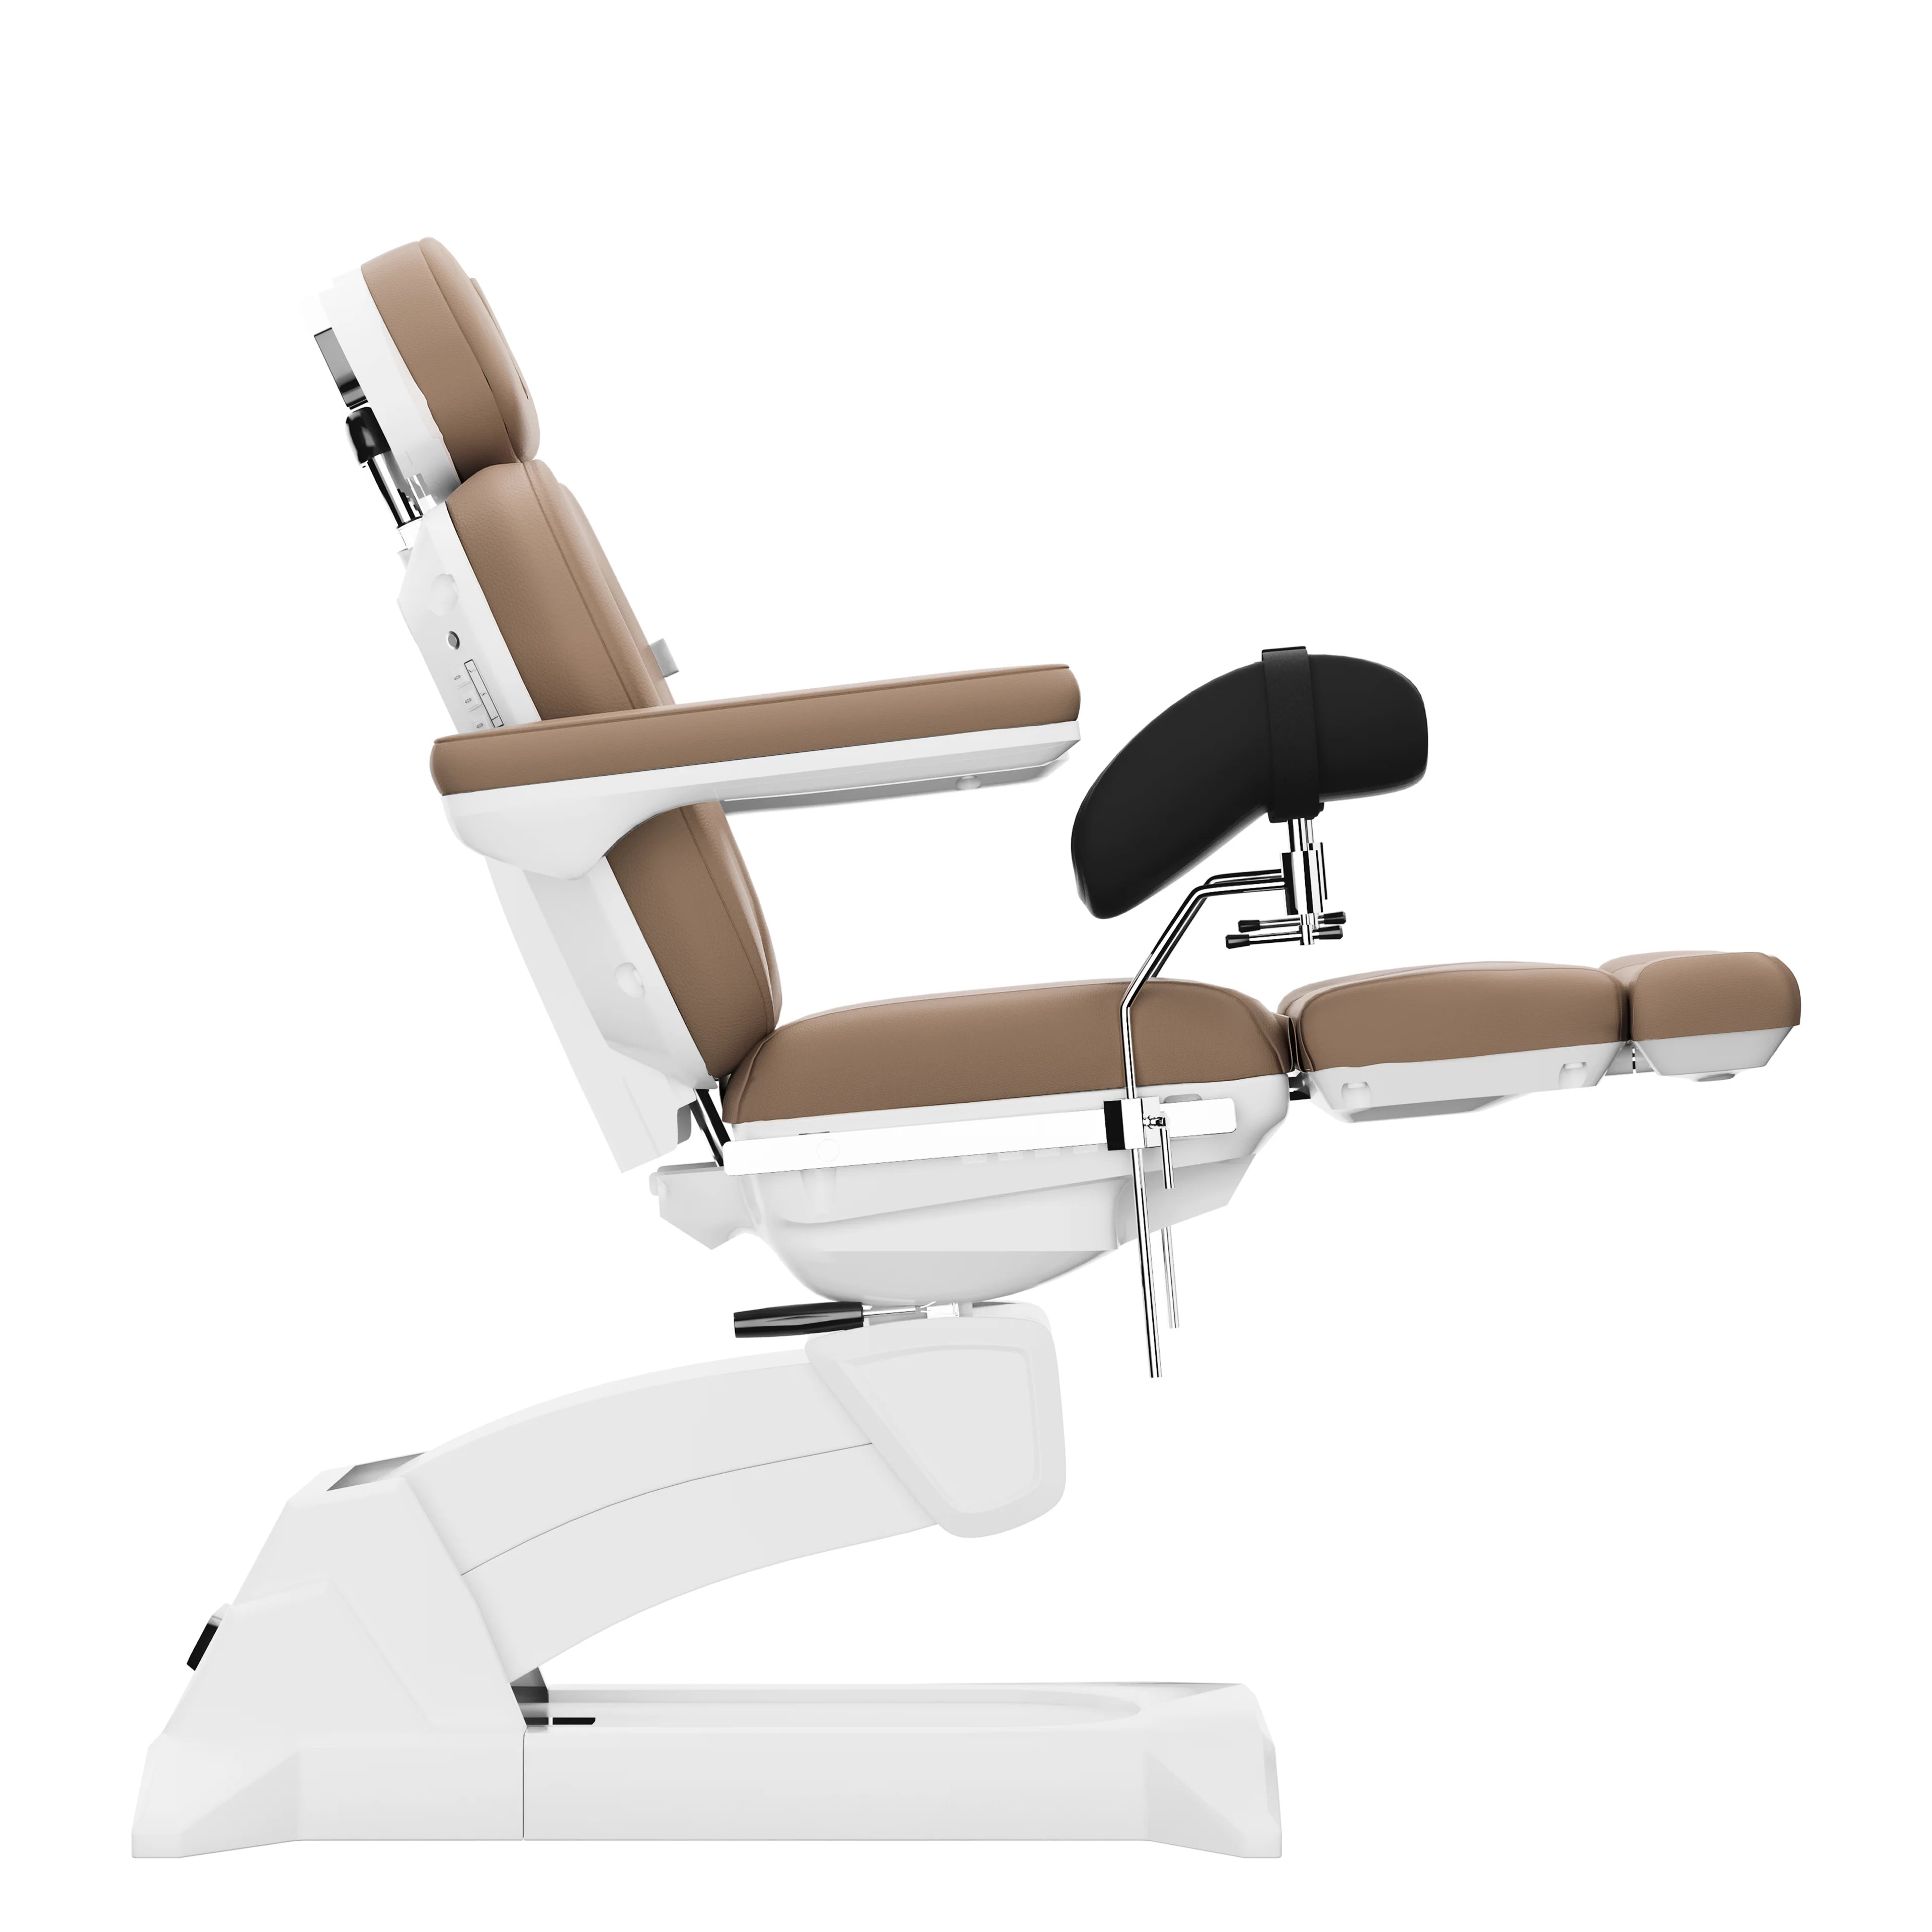 SpaMarc . Ultera (Brown) . OBGYN & Gynecology . Rotating . 4 Motor Spa Treatment Chair/Bed